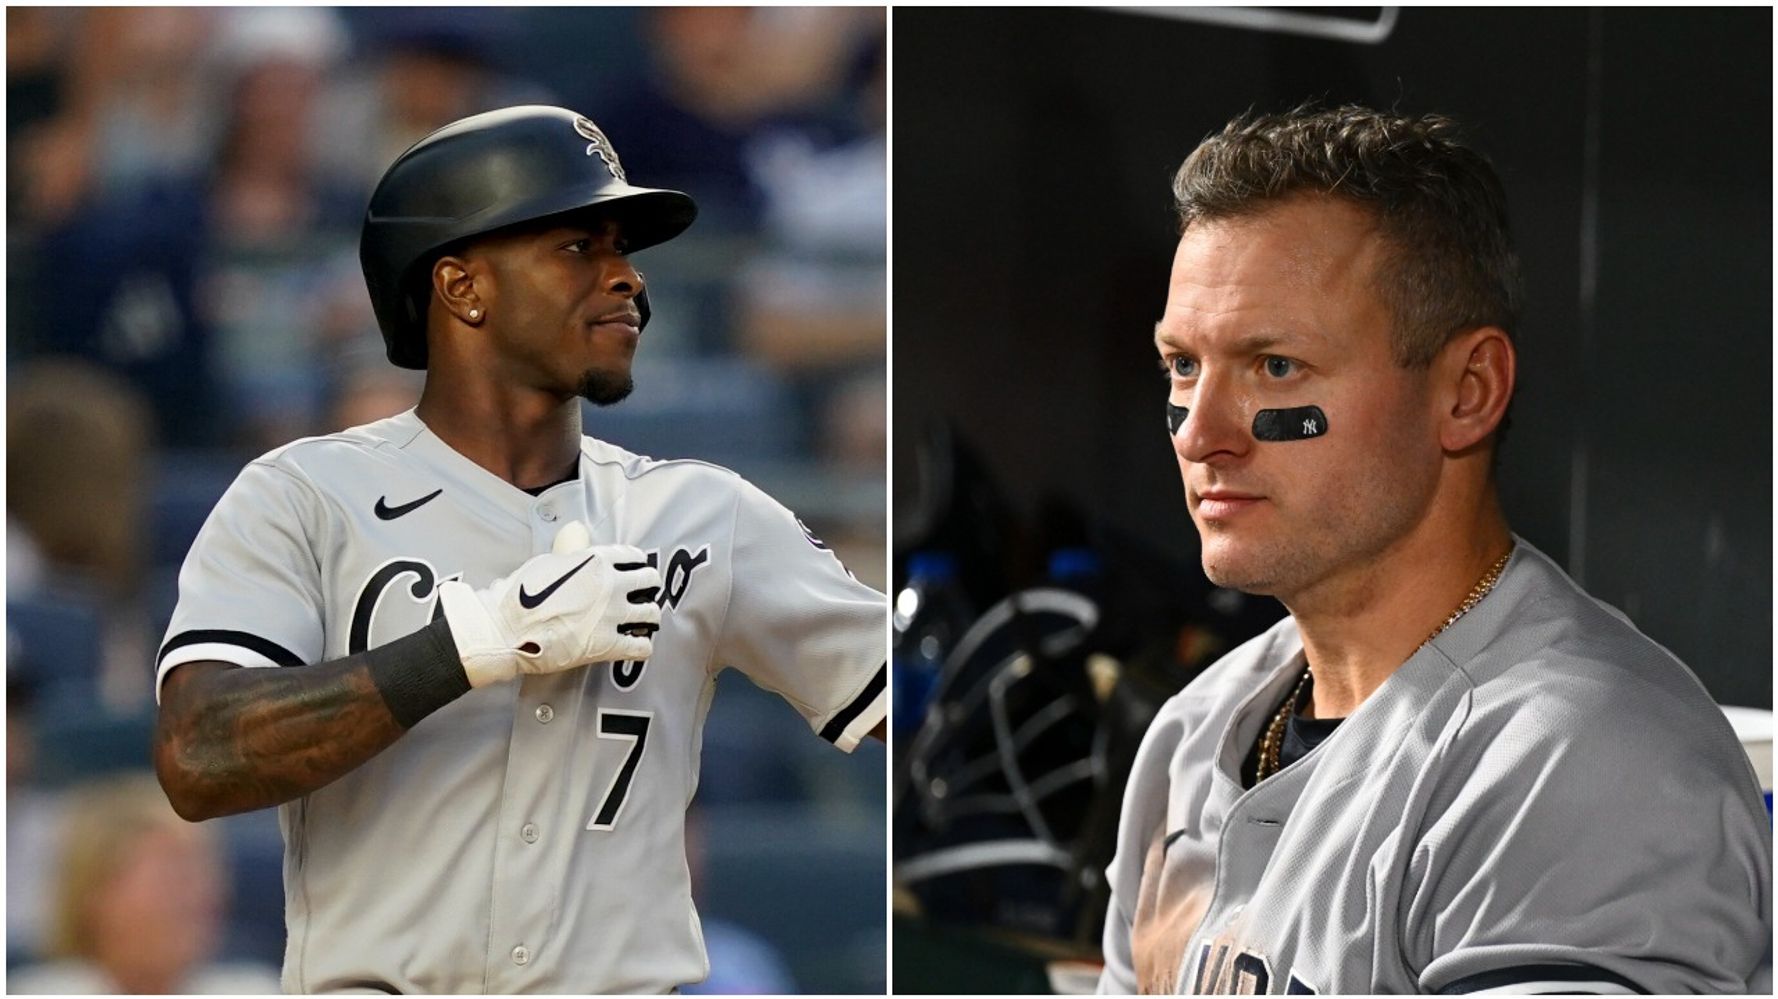 White Sox says Yankees' Donaldson made racist remark toward Anderson